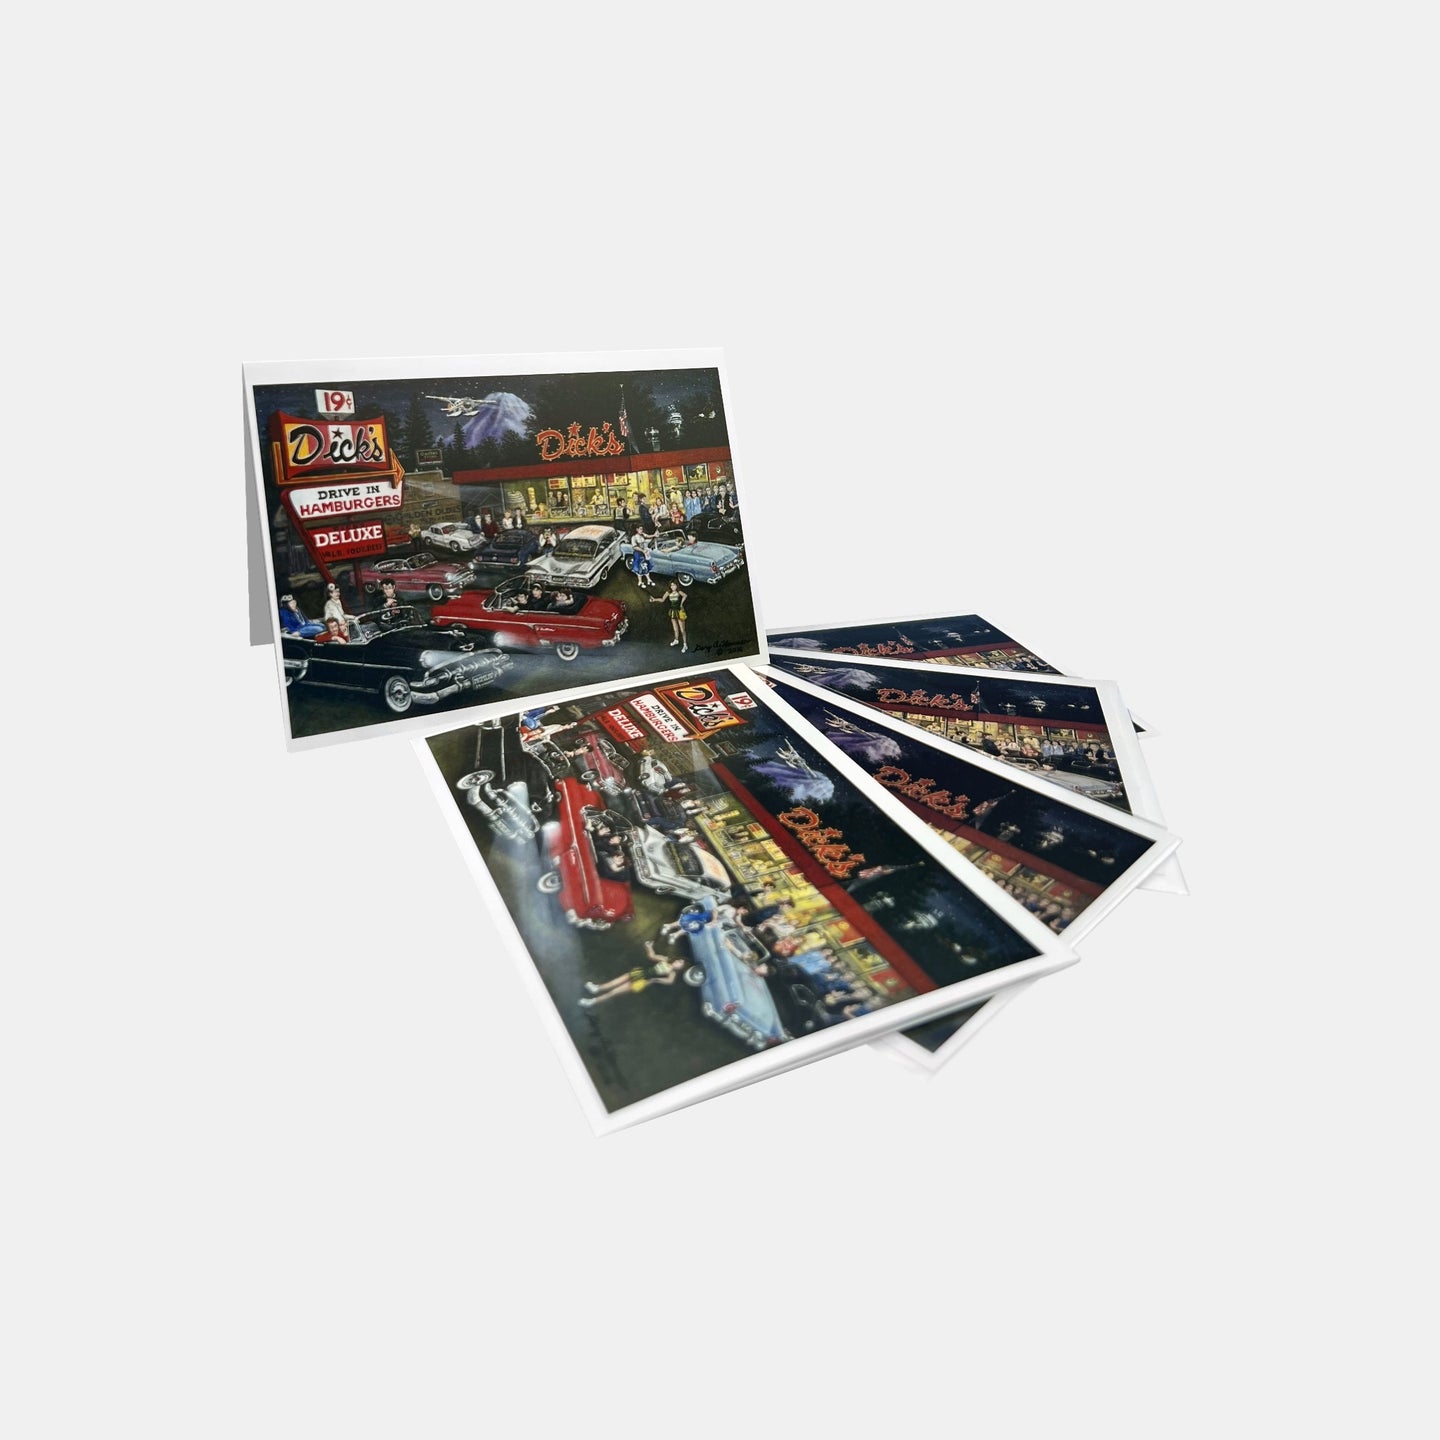 Pack of 5 greeting cards showing a painting of Dick's Drive-In memorabilia 